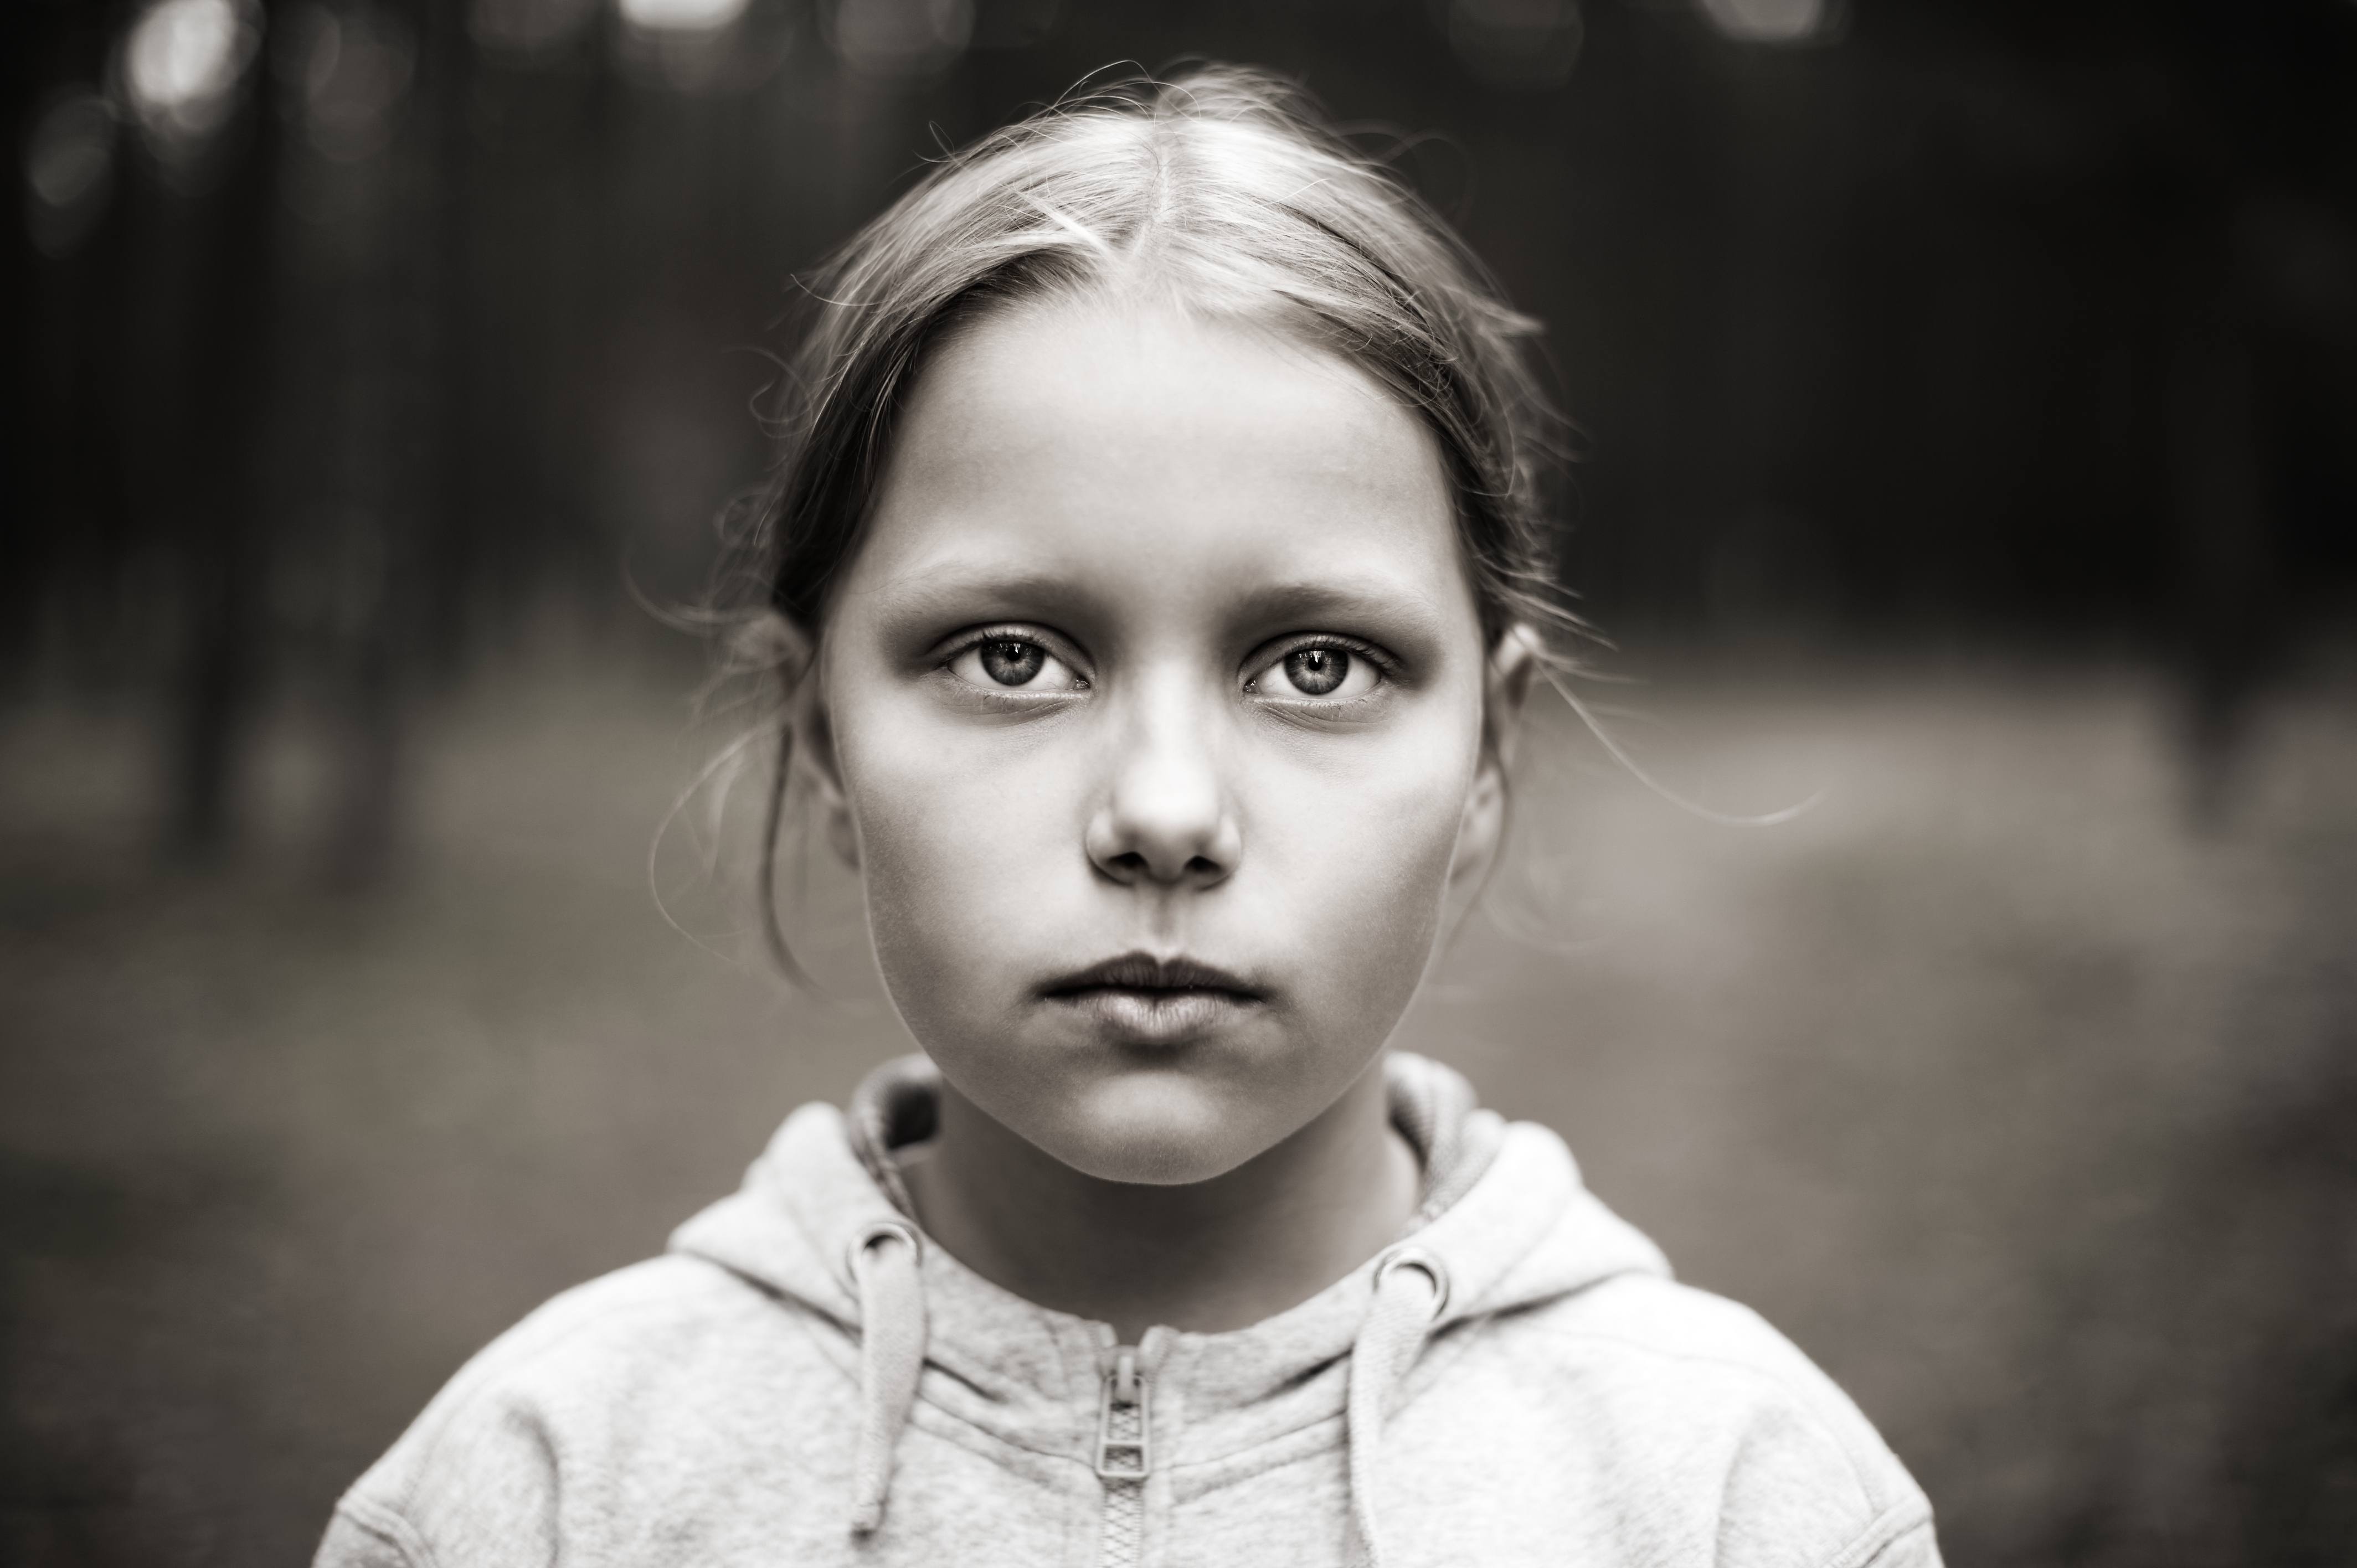 a young serious, frightened and sad looking girl in a black and white photo